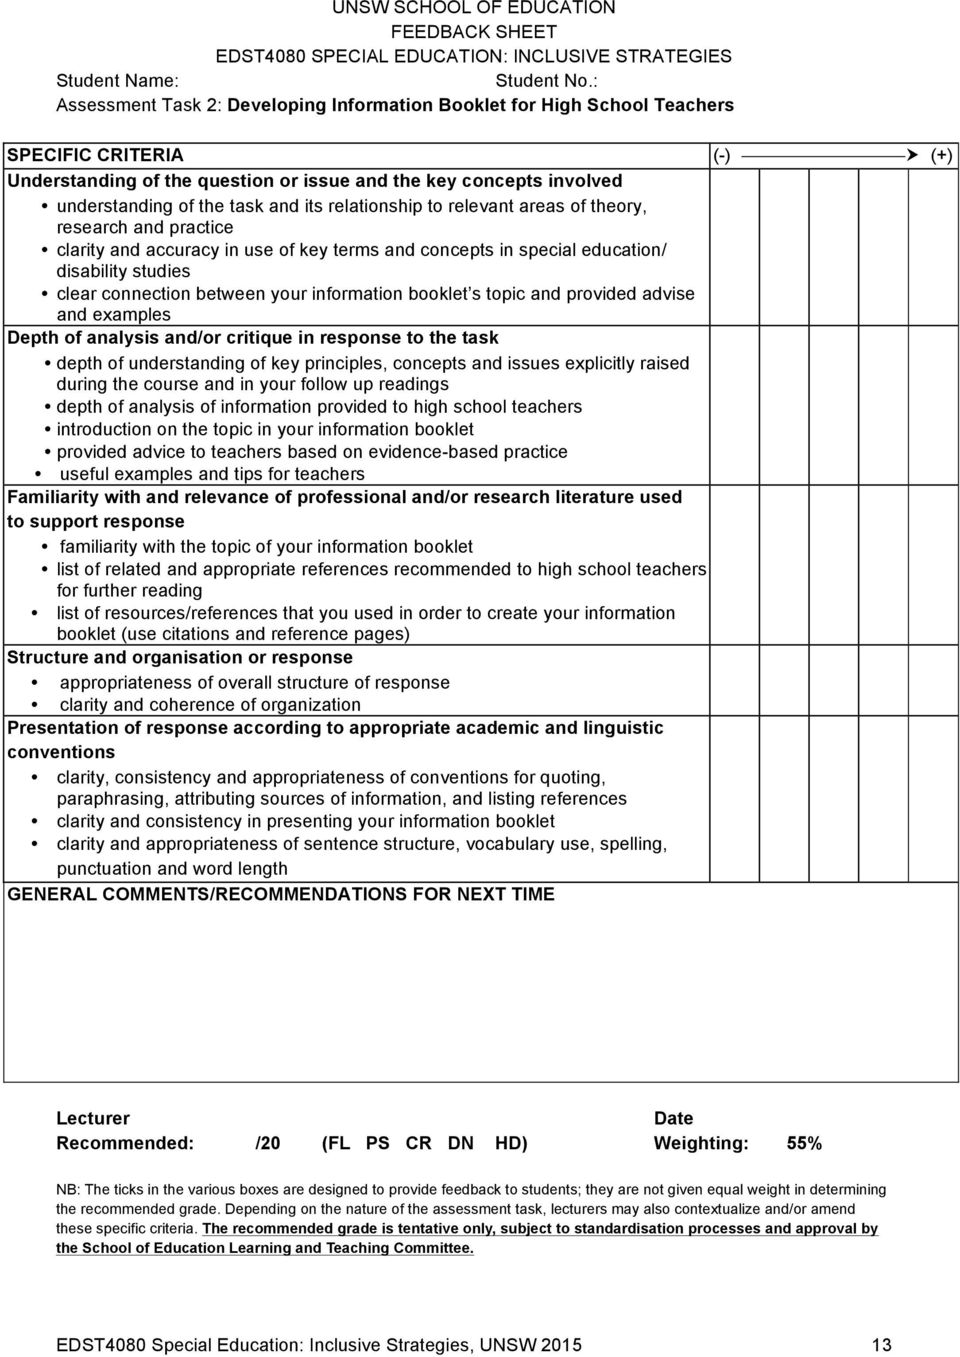 School of Education For Task Analysis Template For Special Education